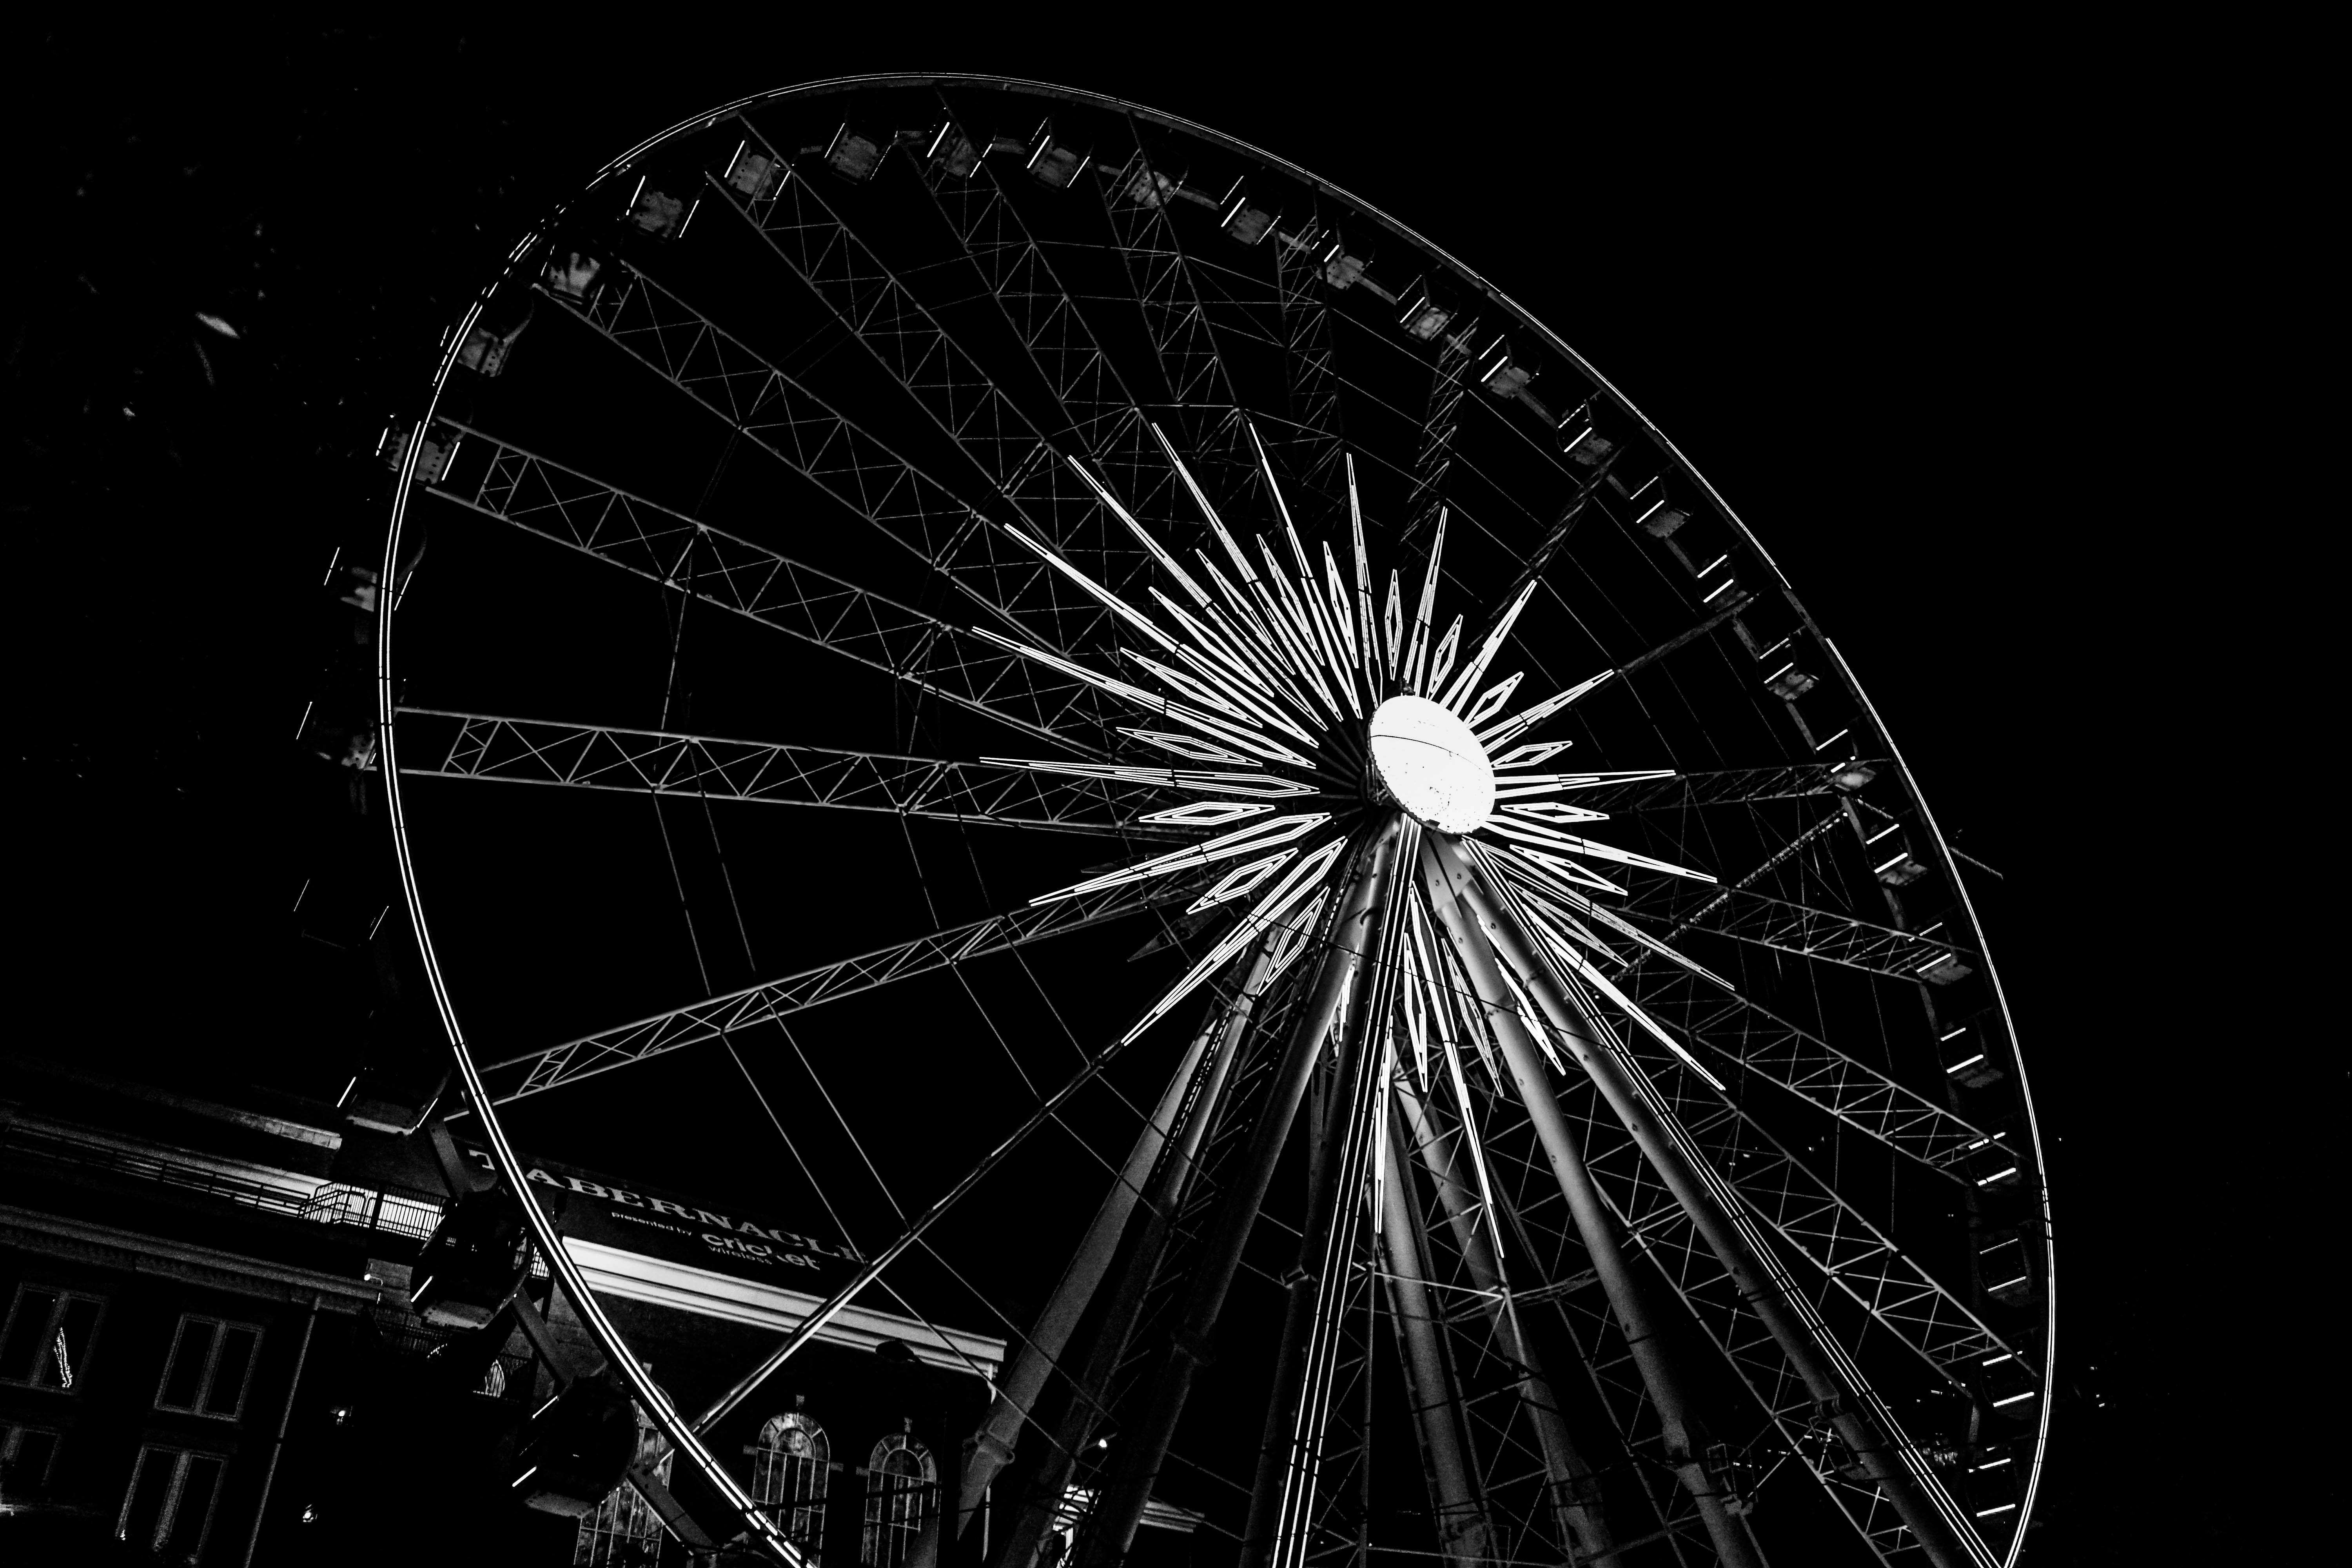 gray and black Ferris wheel during nighttime